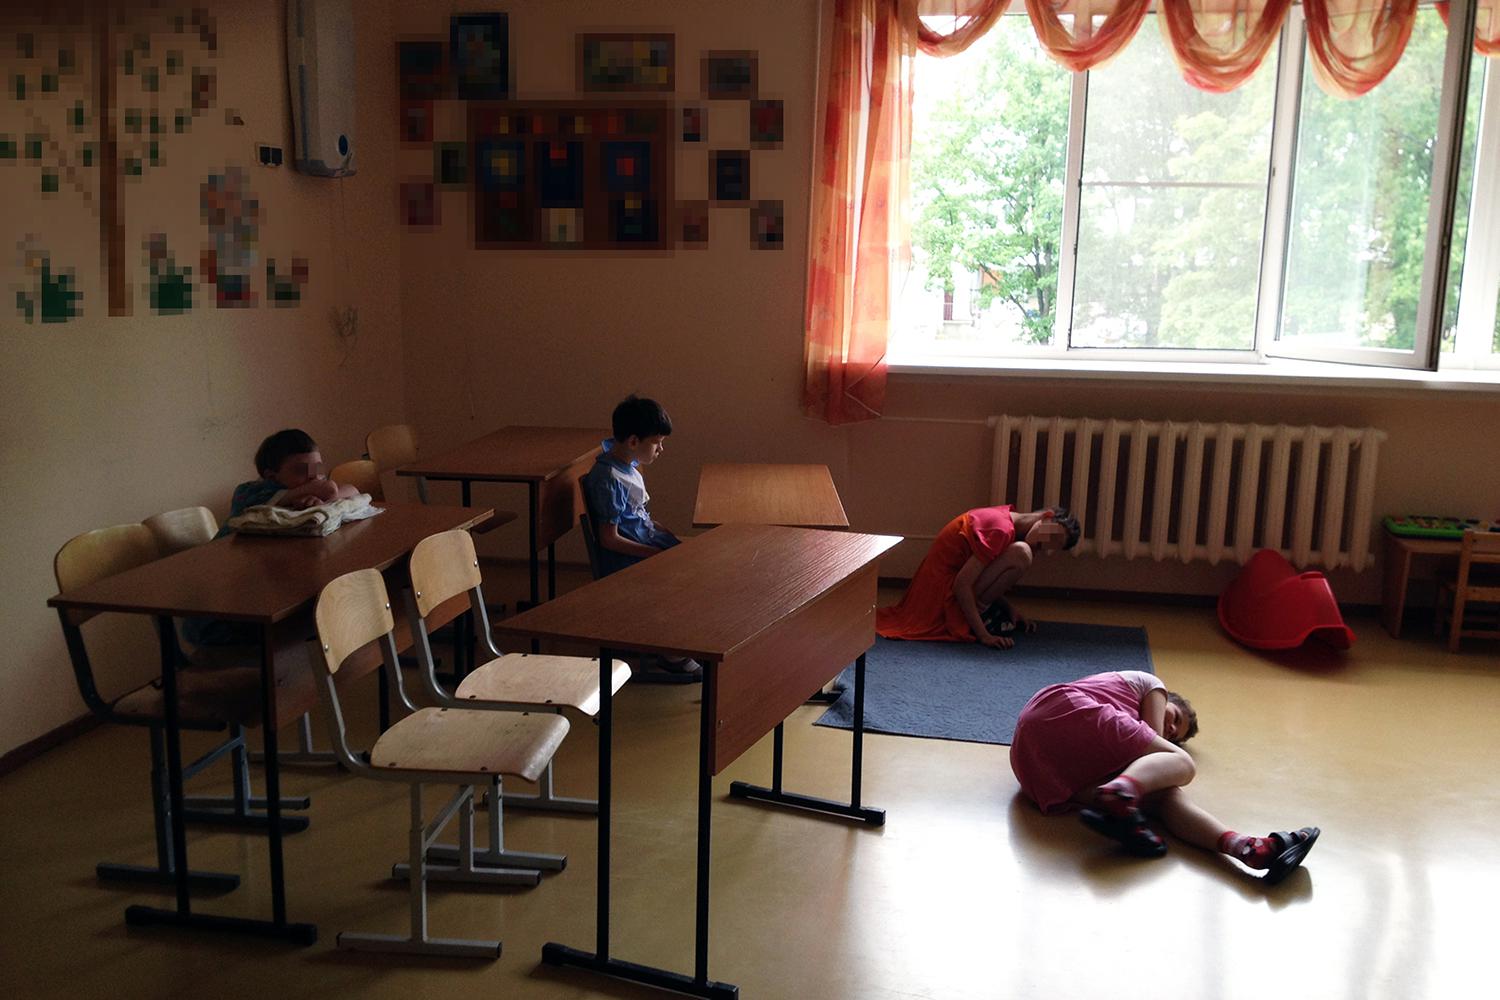 A group of girls, ages 10 to 15, in an orphanage for children with disabilities in northwest Russia. Many children in “specialized” orphanages spend their days seated in rooms with minimal attention from staff, who often lack training and other resources 